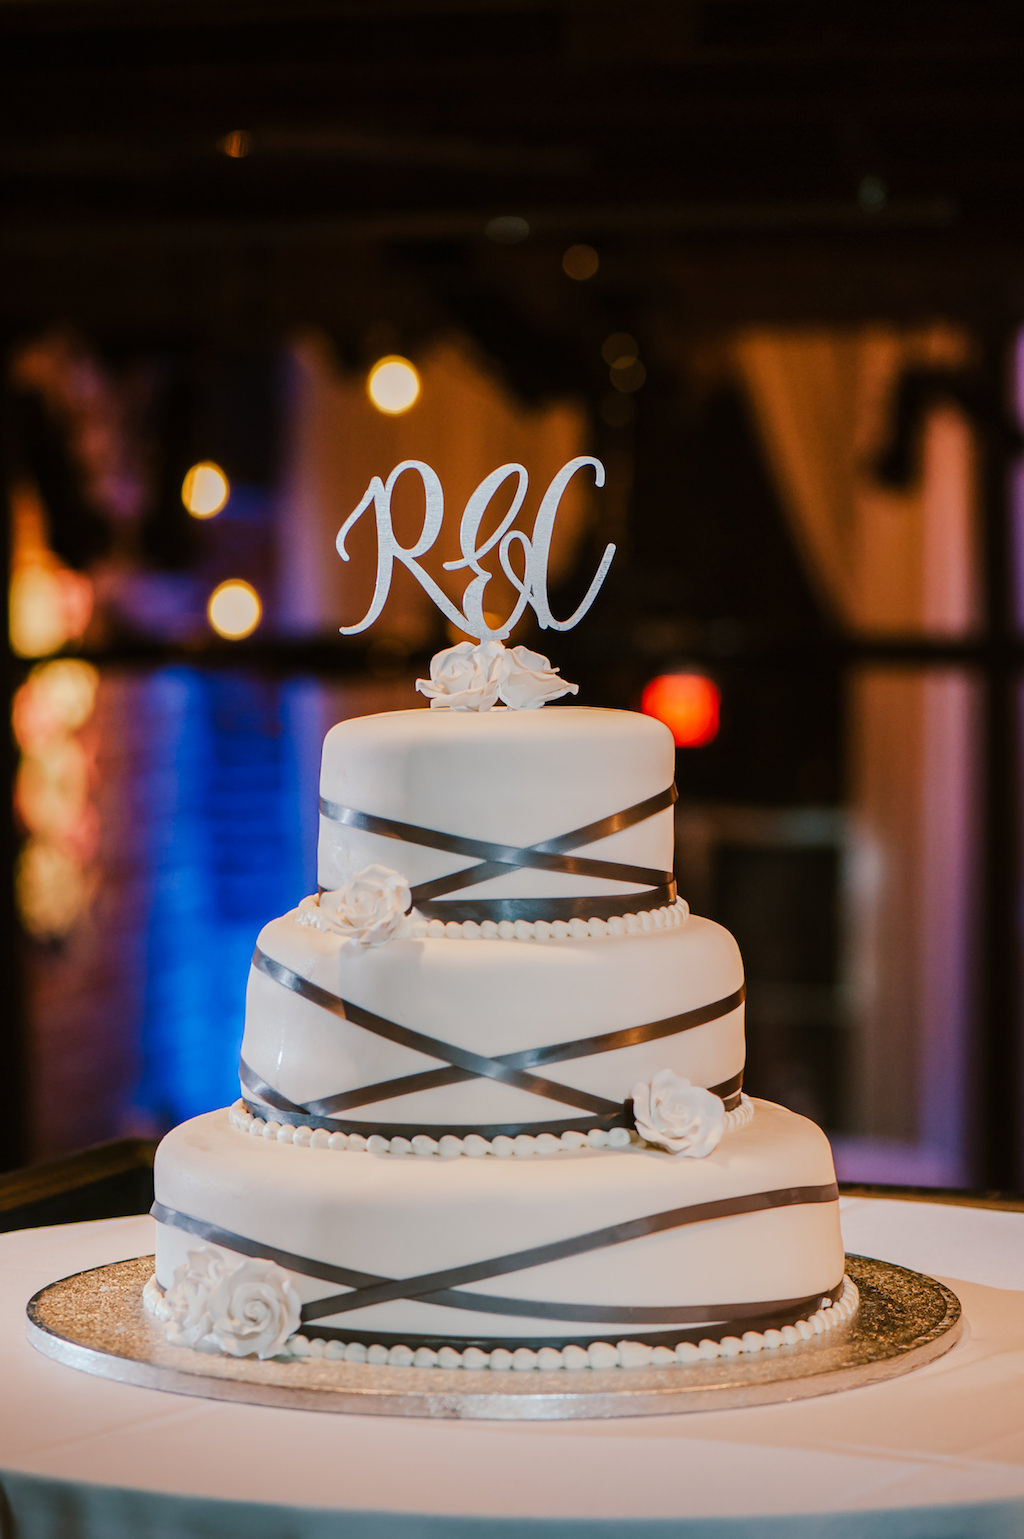 Three Tier Round White Fondant Wedding Cake with Silver Accents and Monogrammed Cake Topper